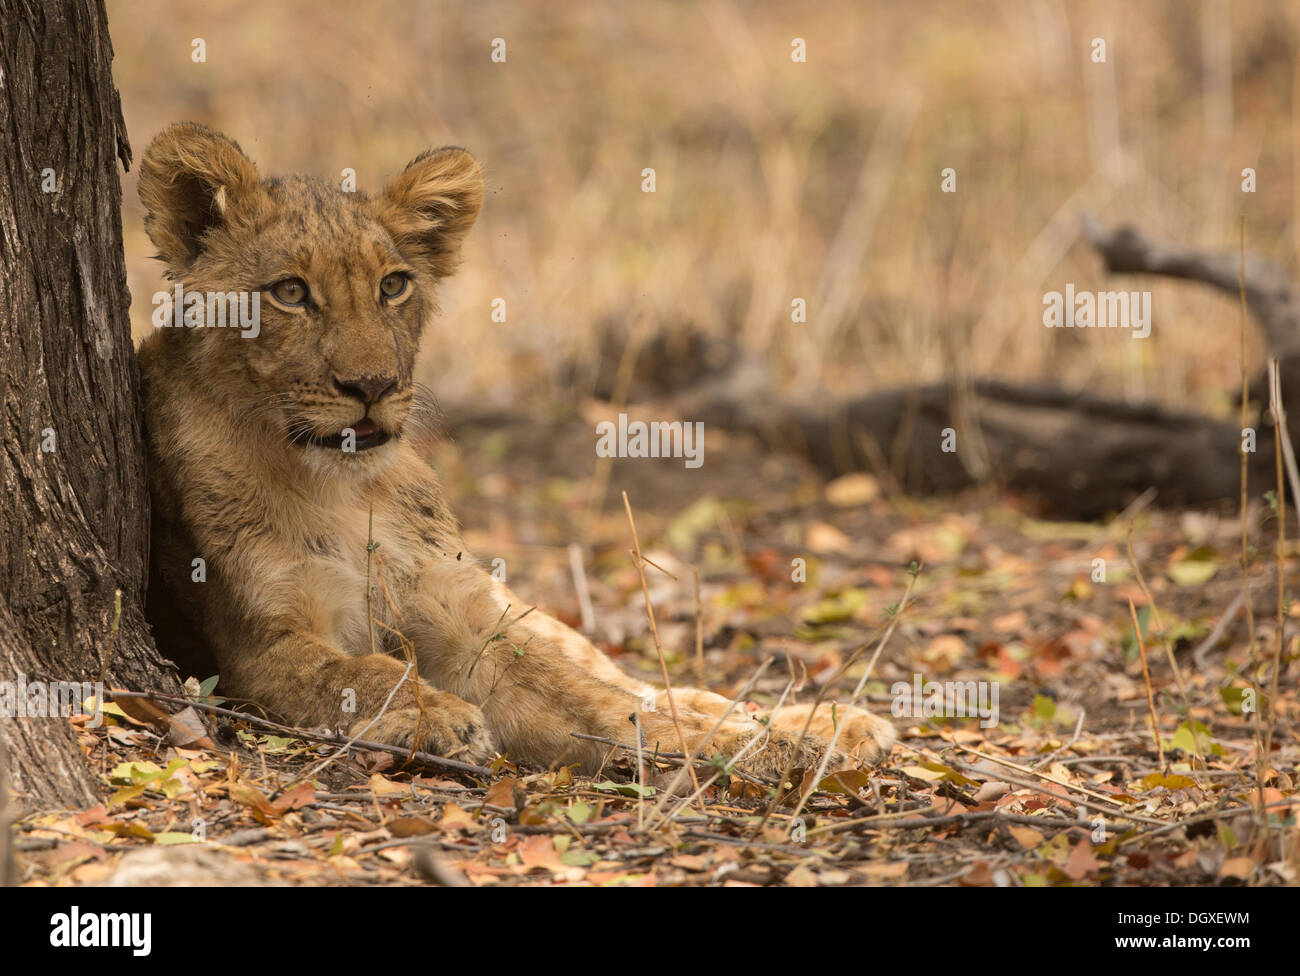 Lion cub (Panthera leo) resting against tree trunk Stock Photo